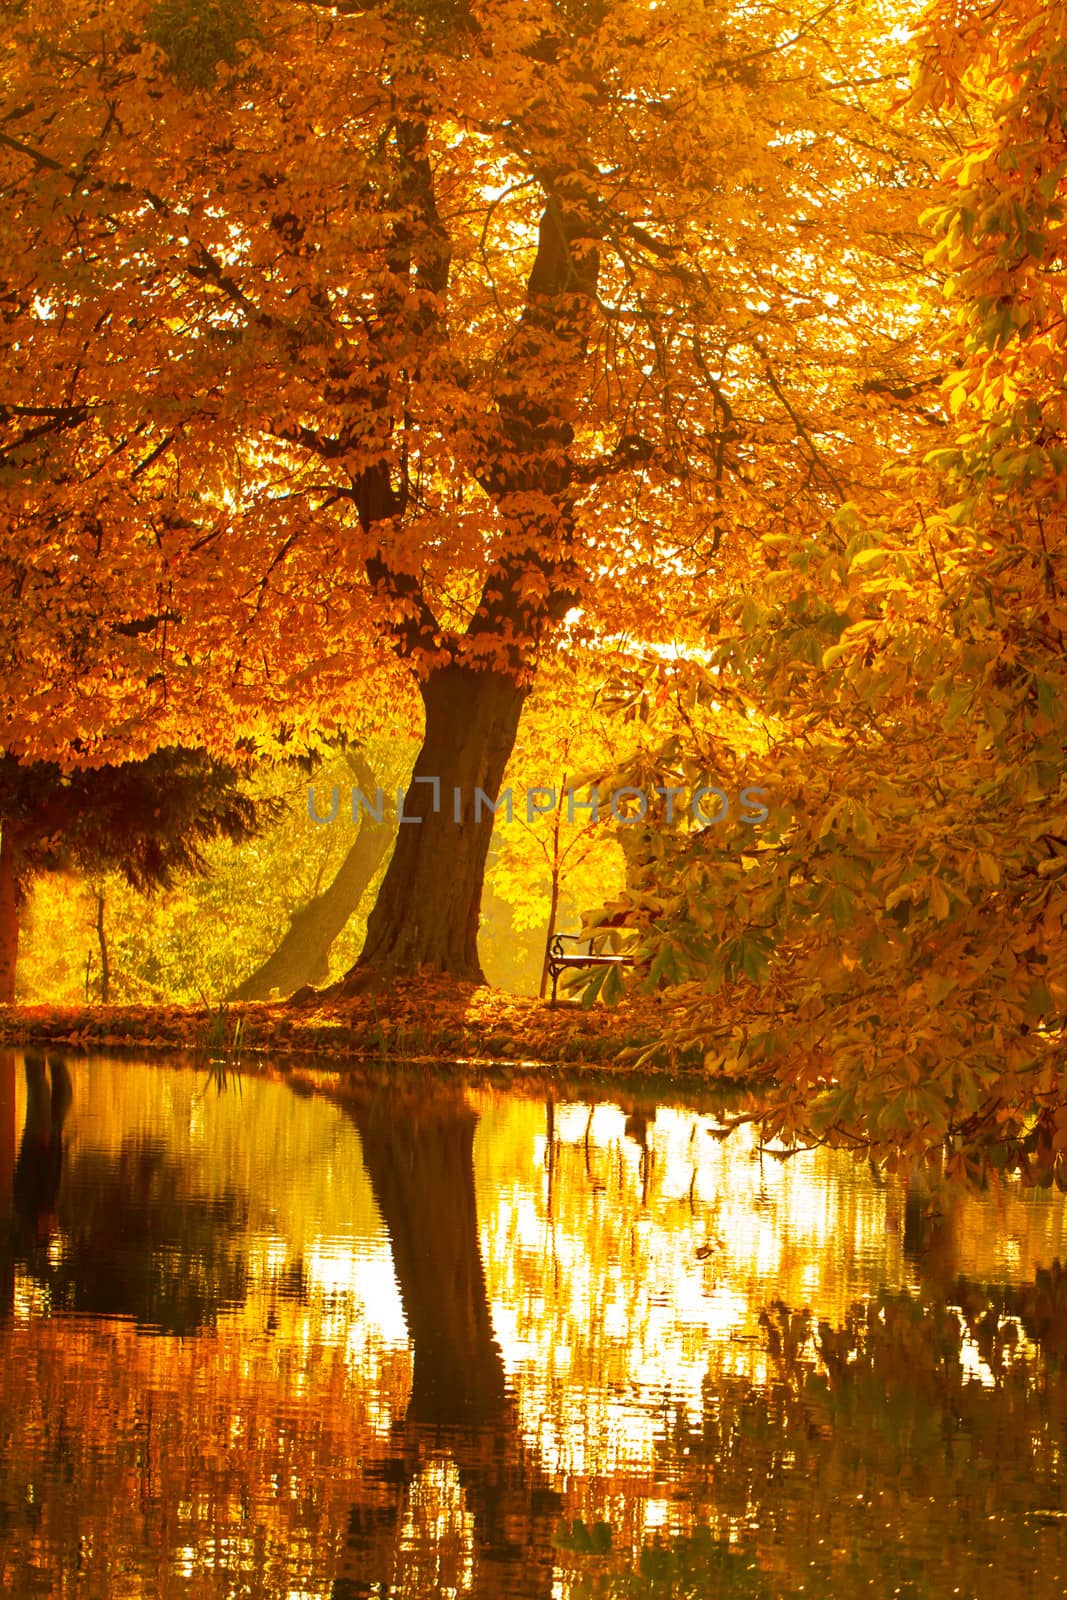 Beautiful colors of autumn landscape by the lake